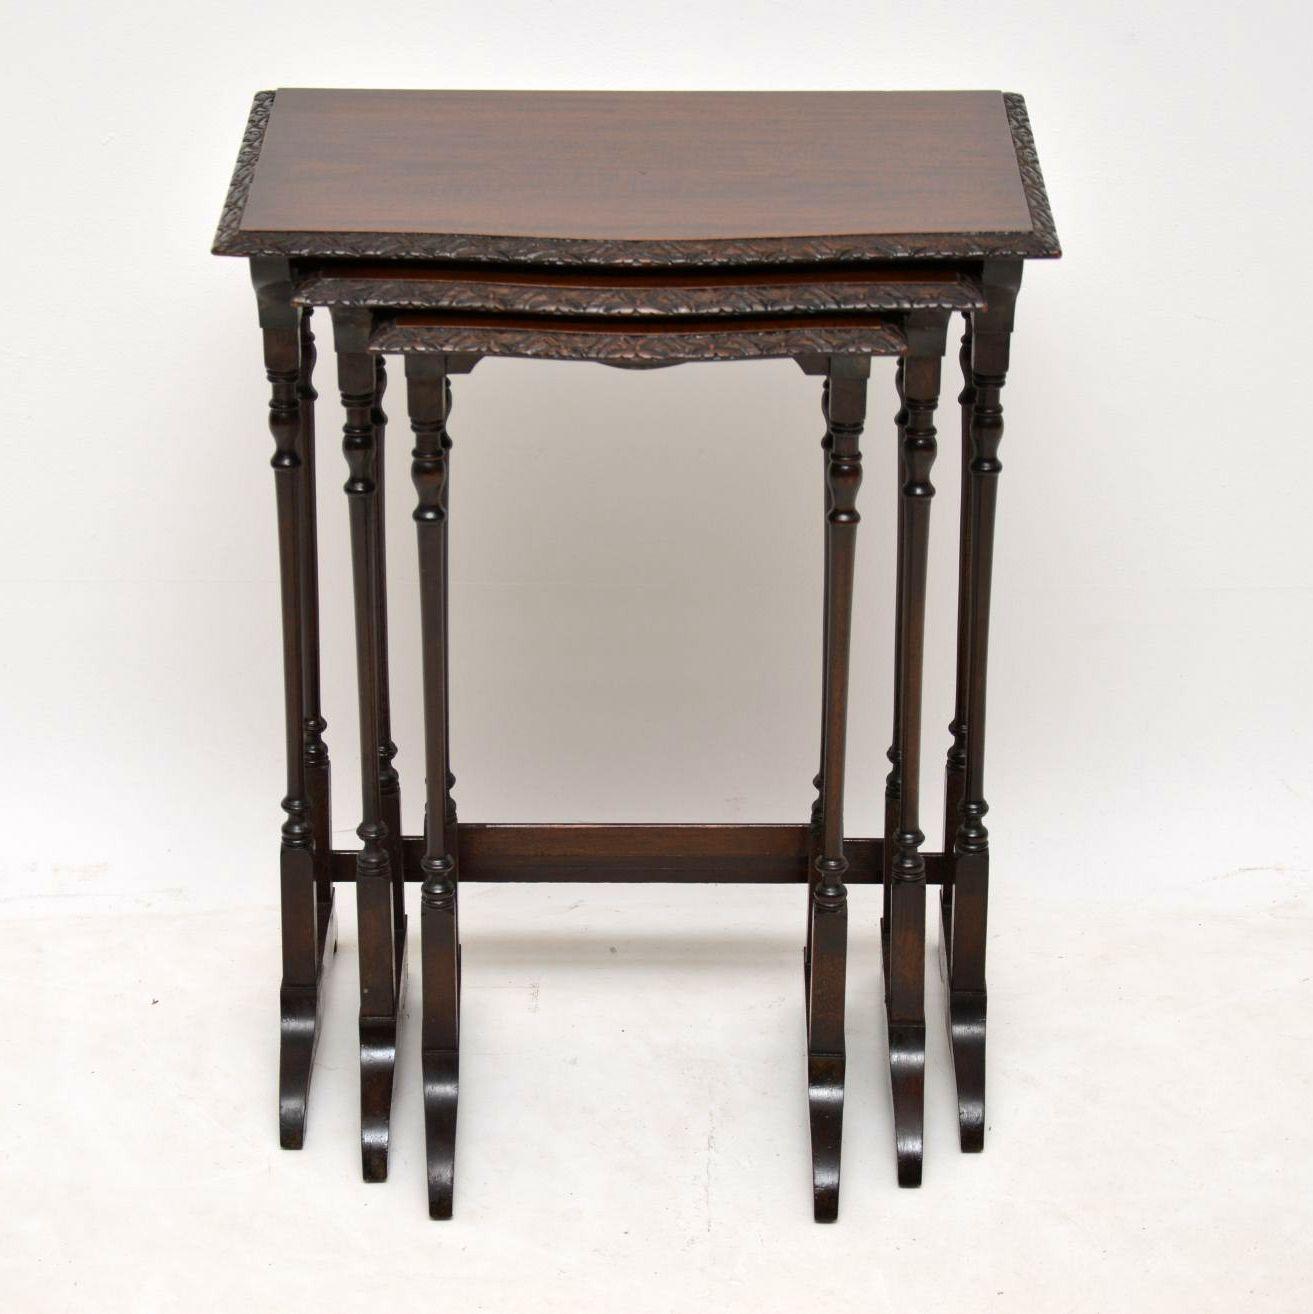 Antique Edwardian mahogany nest of three tables dating to circa 1900-1910 period and in good original condition. The serpentine shaped table tops have finely carved edges and there are stretchers across the backs of the legs providing greater